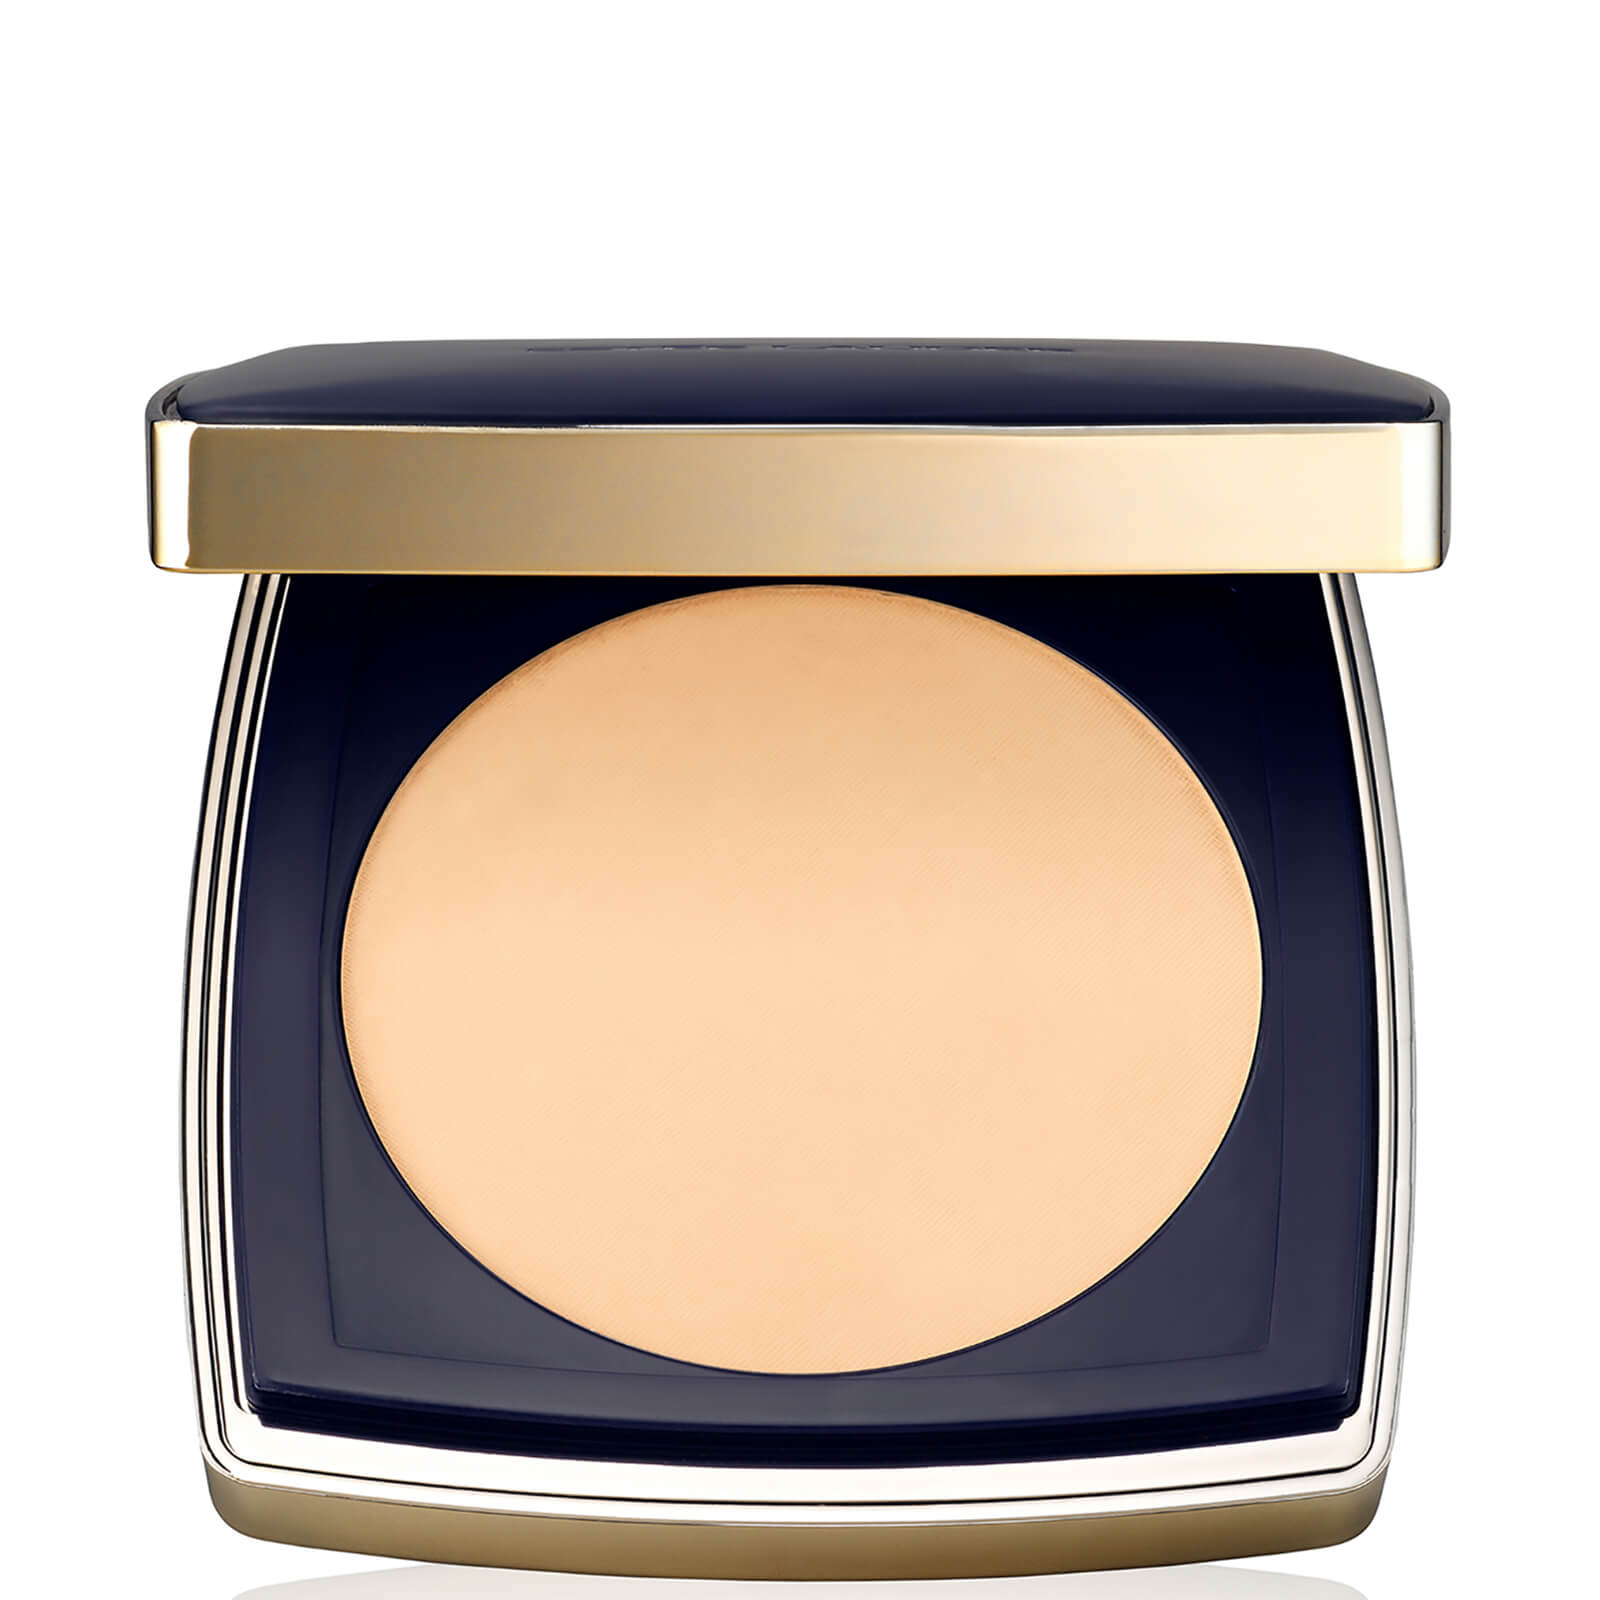 Estée Lauder Double Wear Stay-in-Place Matte Powder Foundation SPF10 12g (Various Shades) - 2N2 Buff